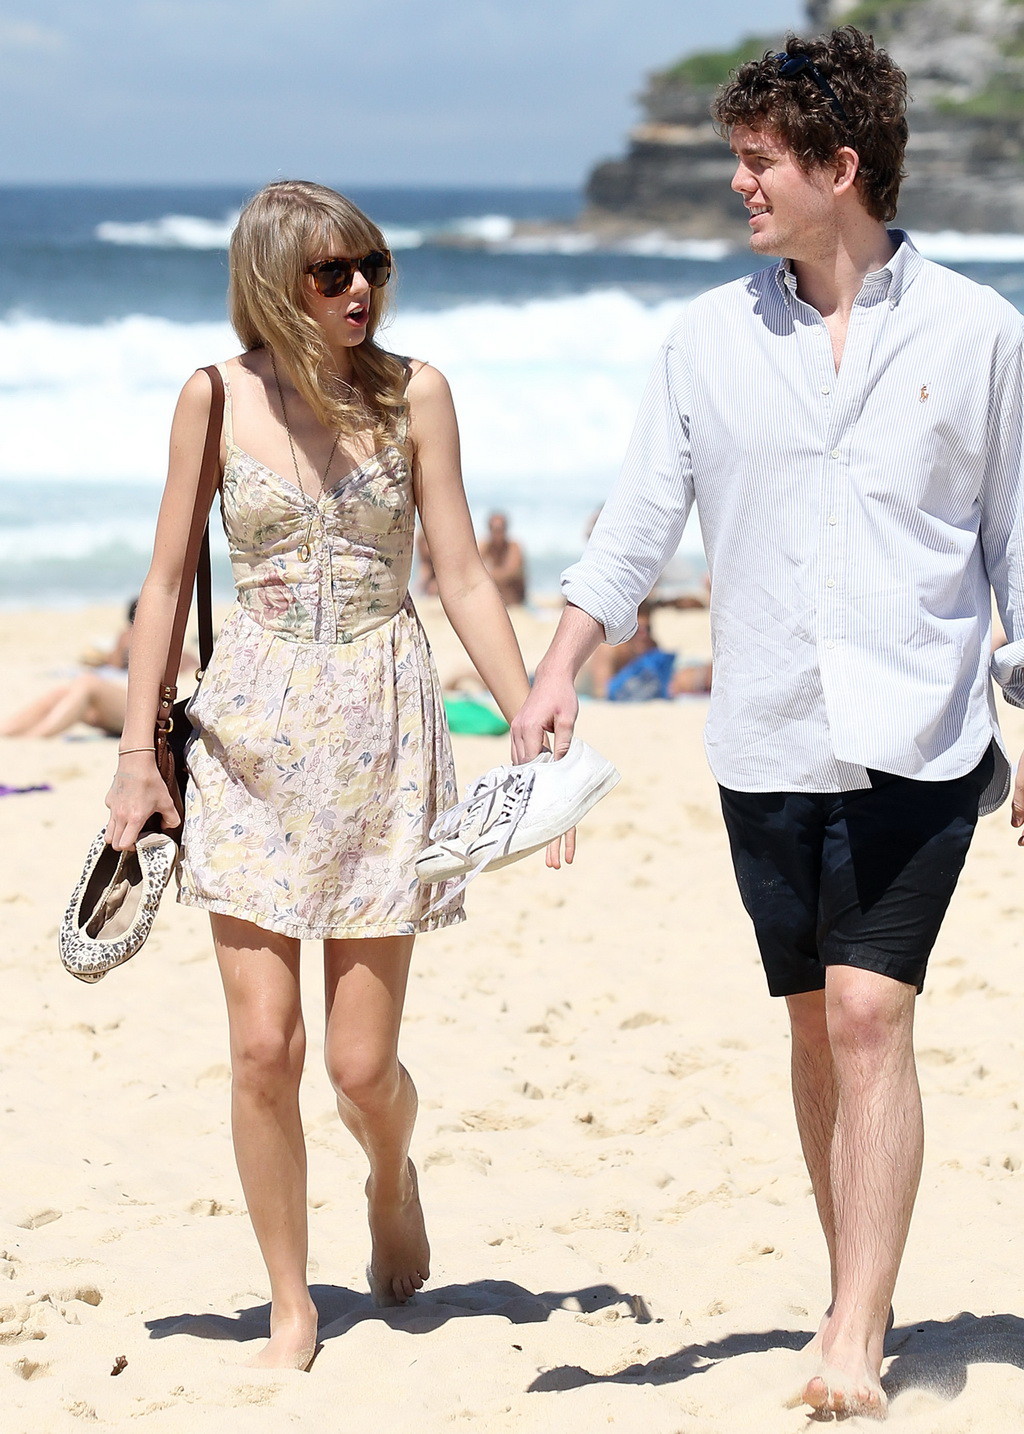 Taylor Swift cleavy and leggy in short dress at the beach in Sydney #75270893